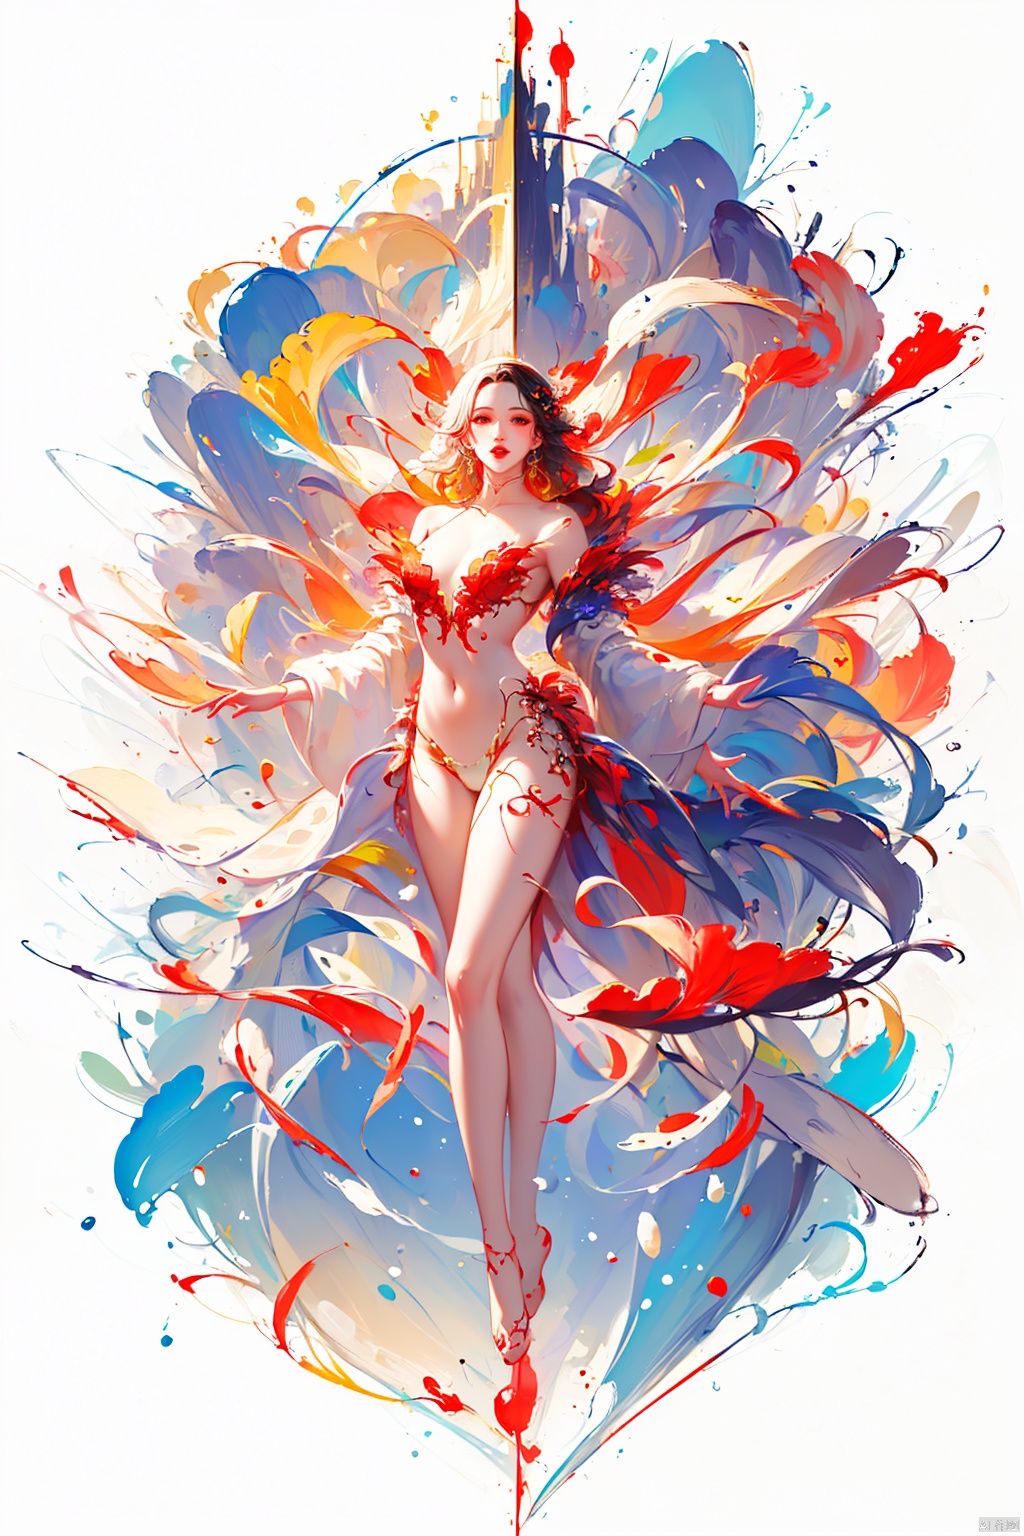  (masterpiece, top quality, best quality, official art, beautiful and aesthetic: 1.2), (1 girl), (full body: 1.3), extreme detailed, (fractal art: 1.3), colorful, break, highest detailed, Red, break, White, break, Yellow, break, Chest, Abdomen, Nine-tailed fox, (whole body: 1.5), WaHaa, bpwc, meiren-red lips, Ink scattering_Chinese style